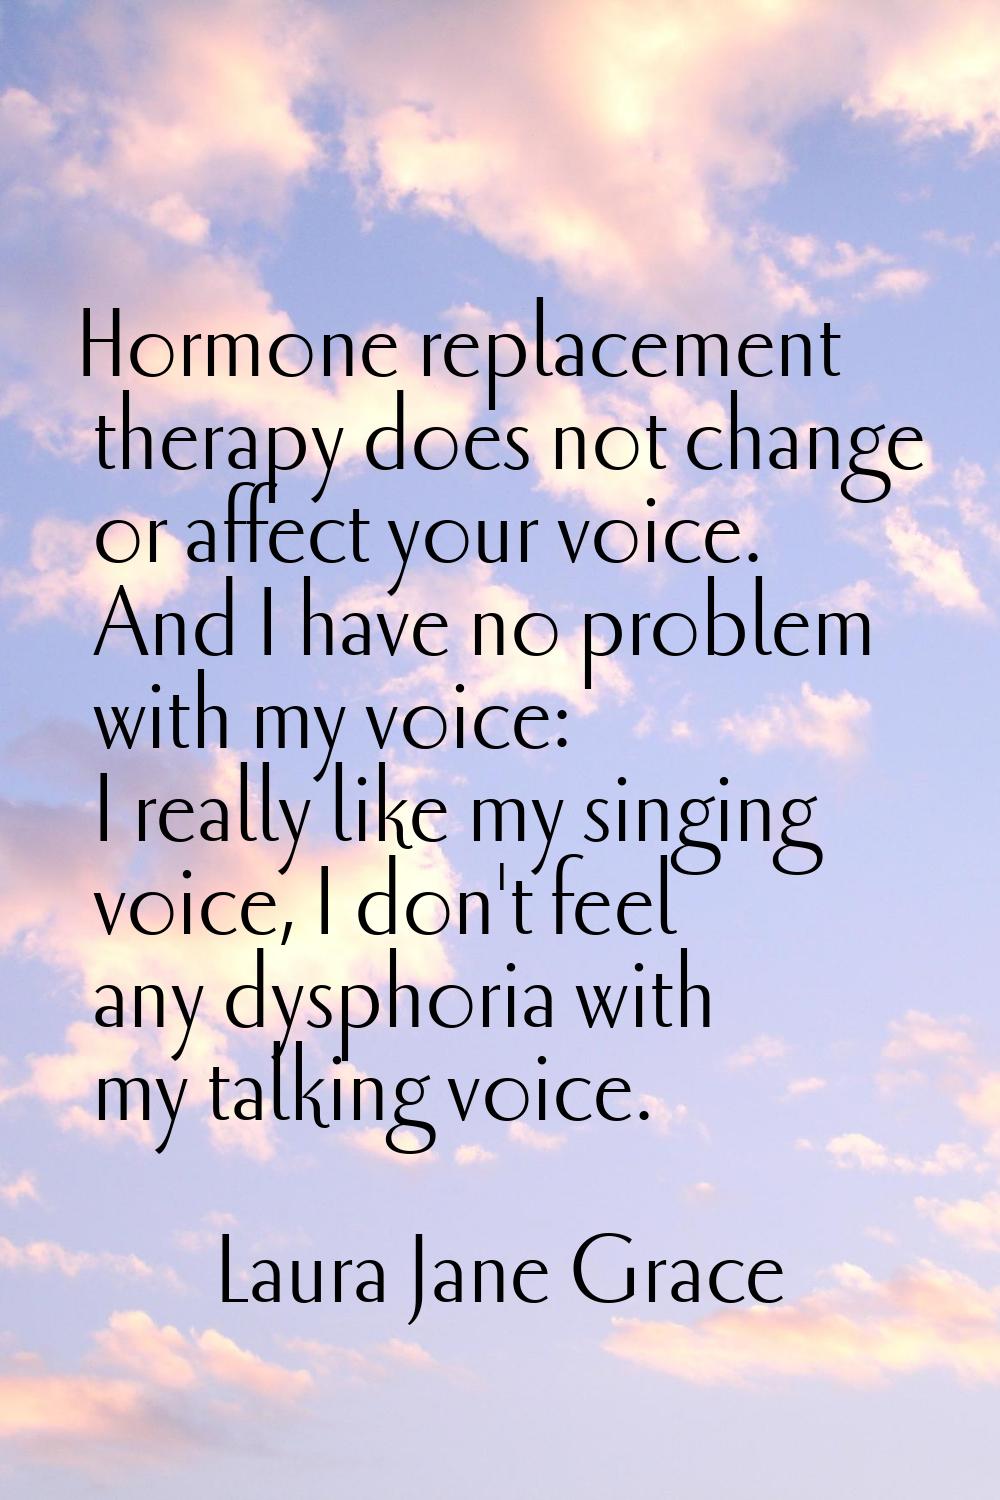 Hormone replacement therapy does not change or affect your voice. And I have no problem with my voi